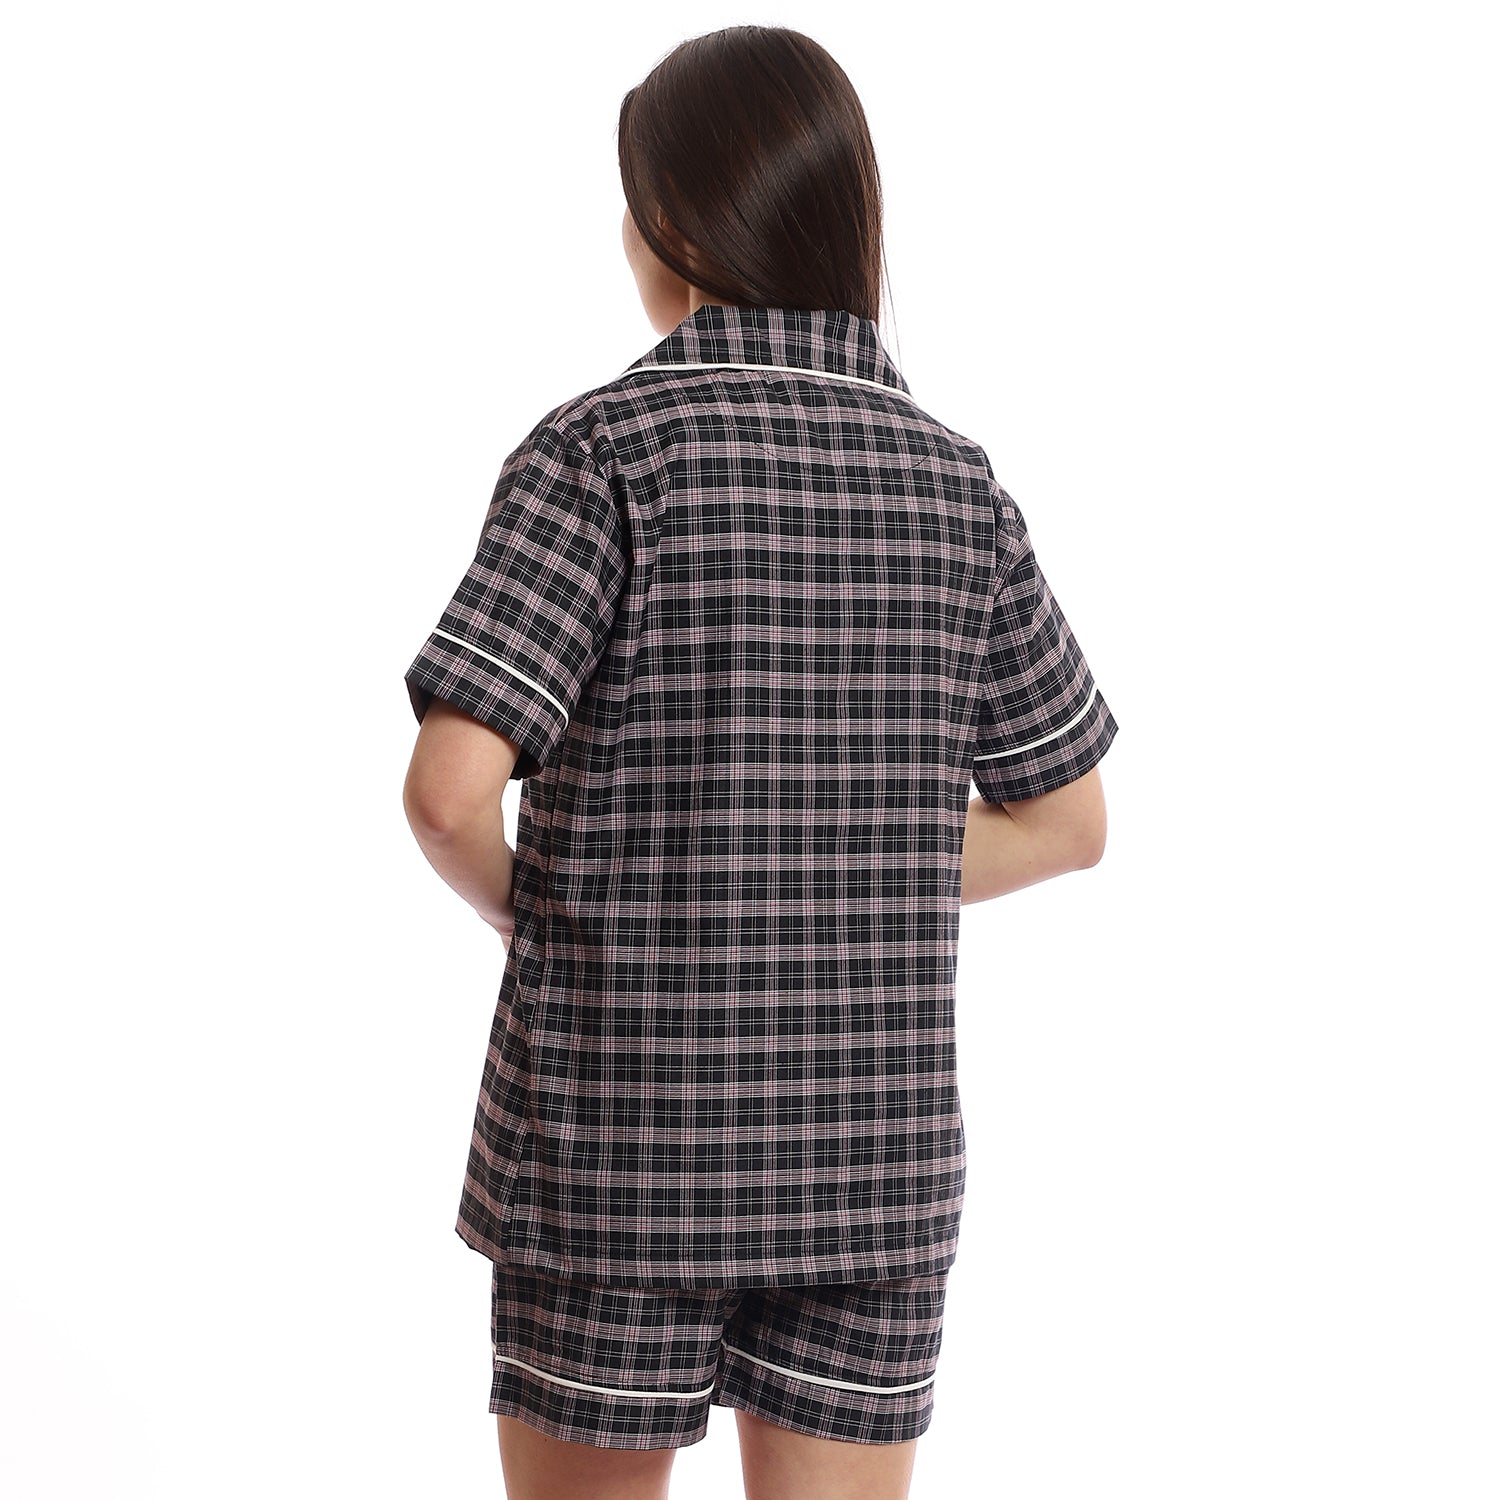 Gingham Pattern Buttoned Down Shorts Pajama Set